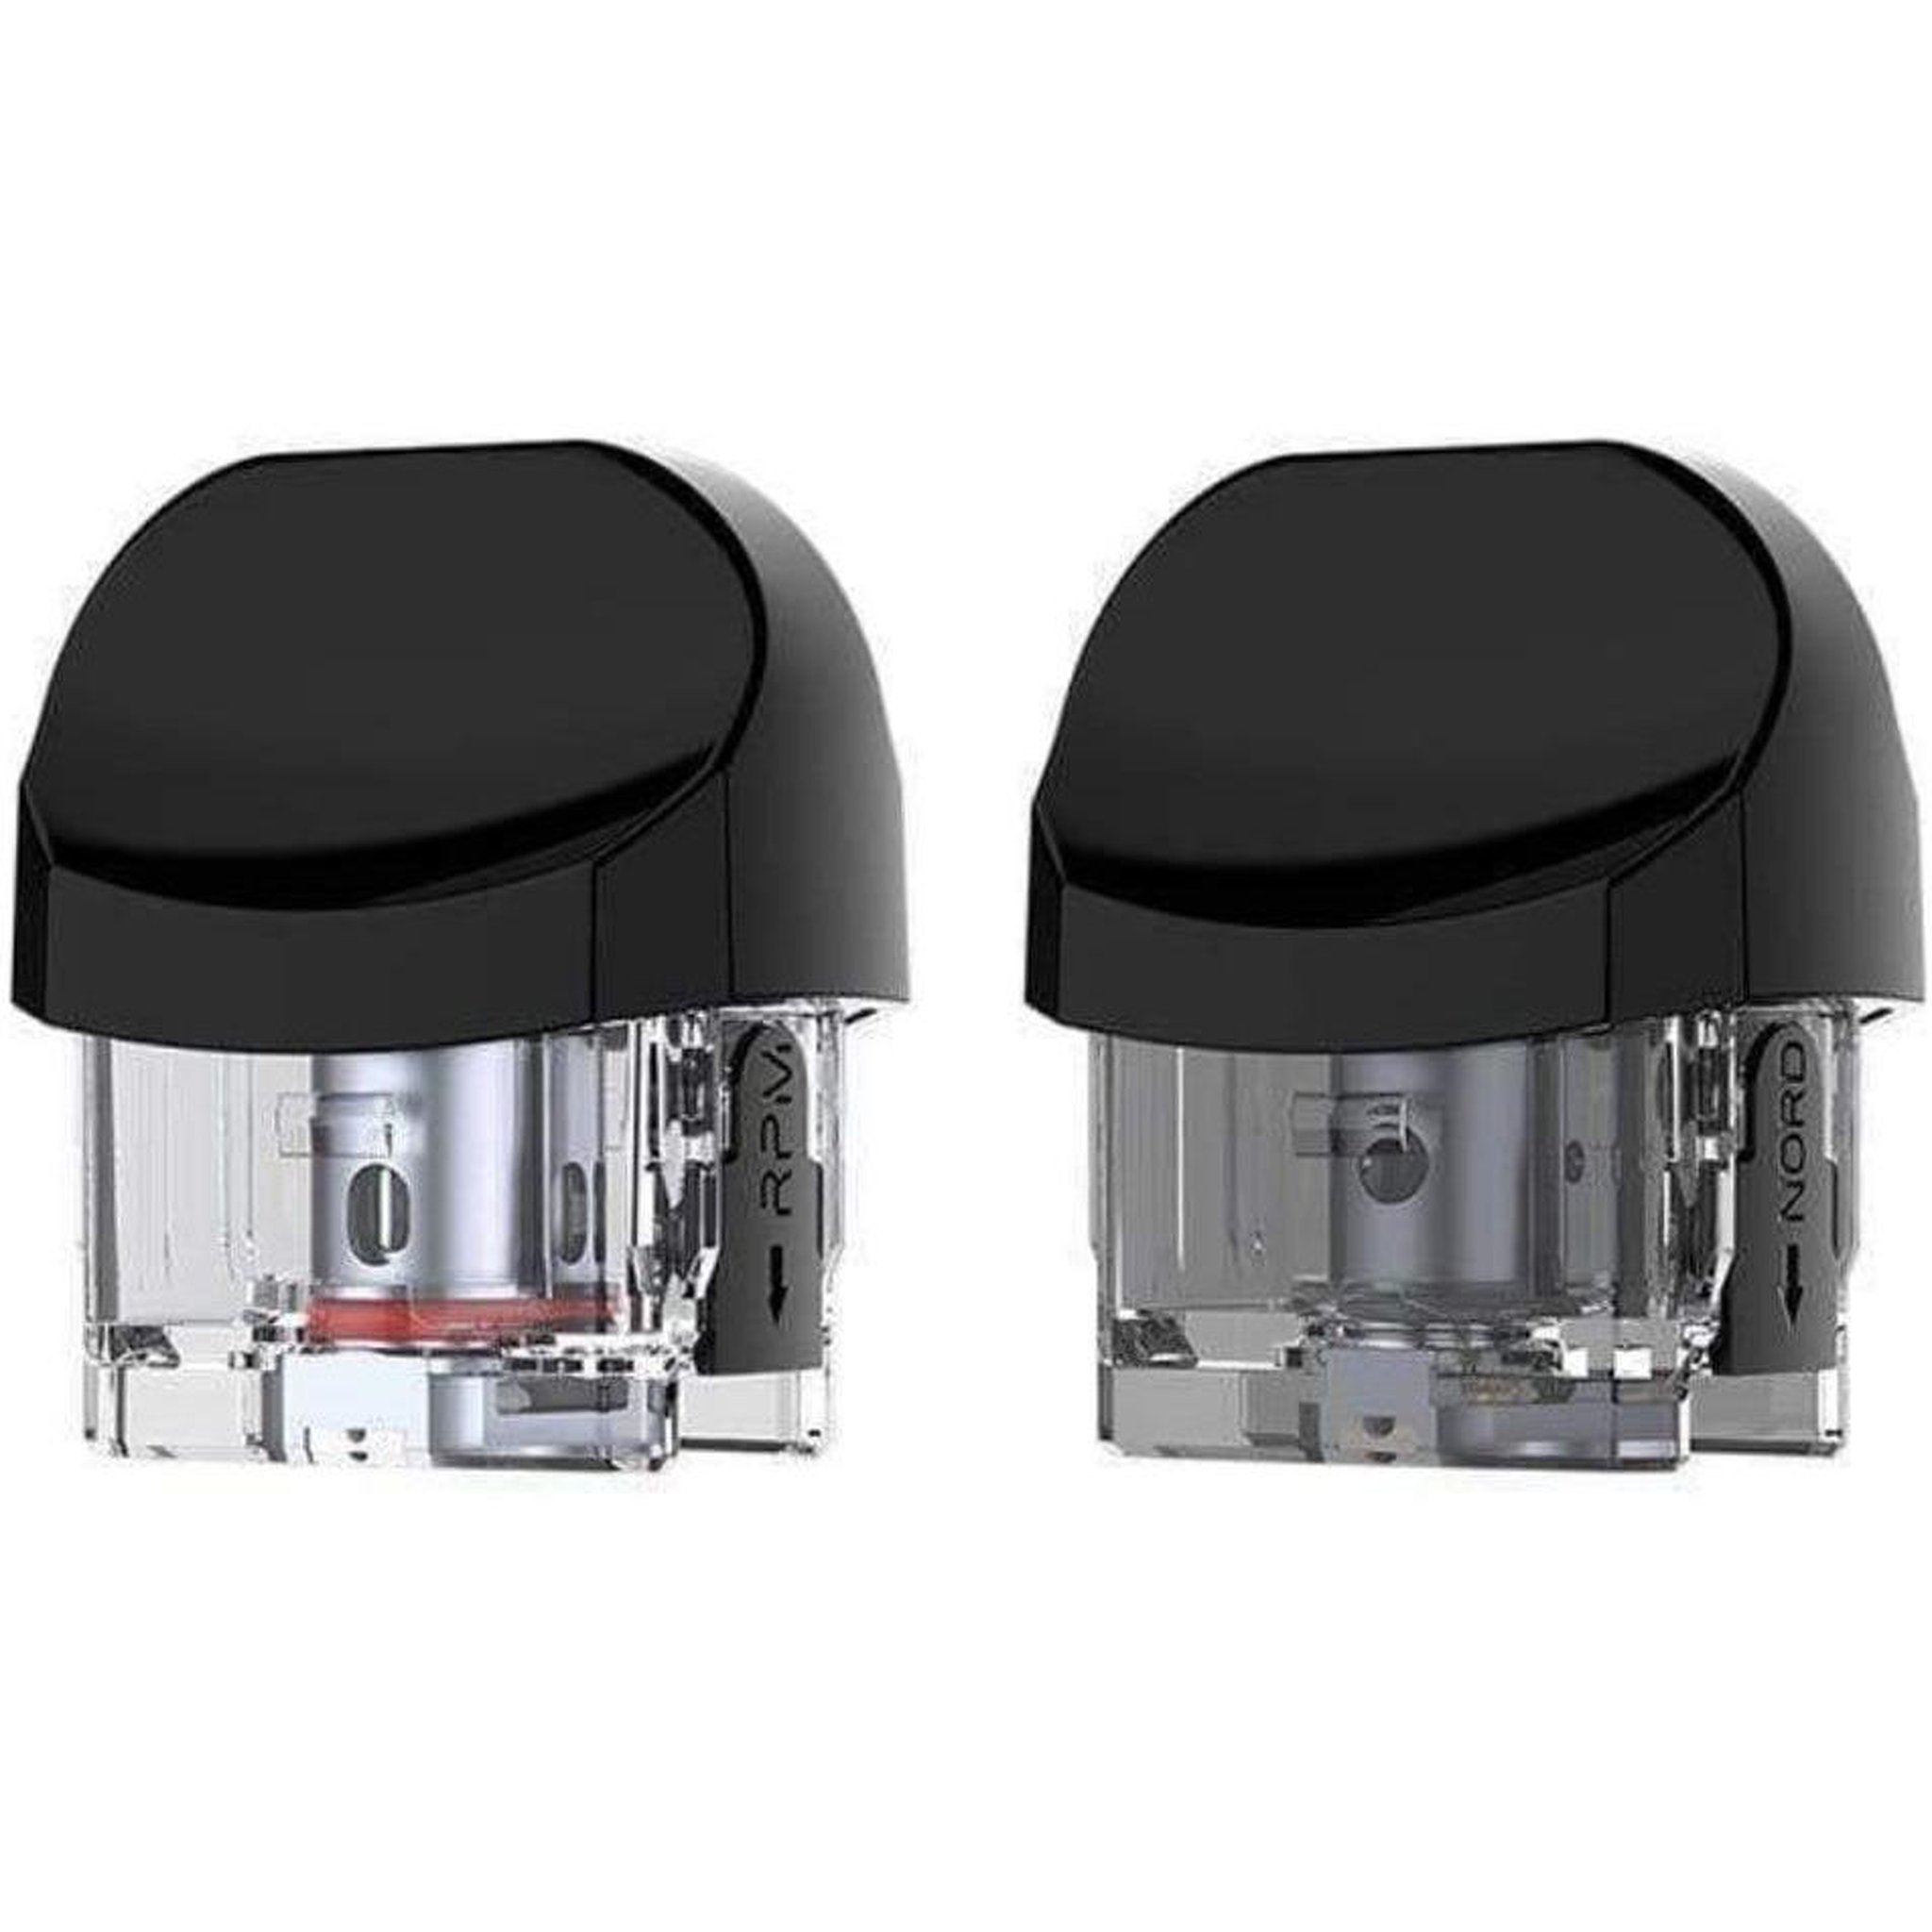 Smok Nord 2 Replacement Pods Replacement Pods for the Smok Nord 2. Two varieties with 4.5mL e-liquid capacity, each compatible with a specific set of coils: RPM & Nord. Order now at Vape4change.ca.	
Source :https://vape4change.ca/collections/coils-pod-coils/products/smok-nord-2-repl by Vape4change